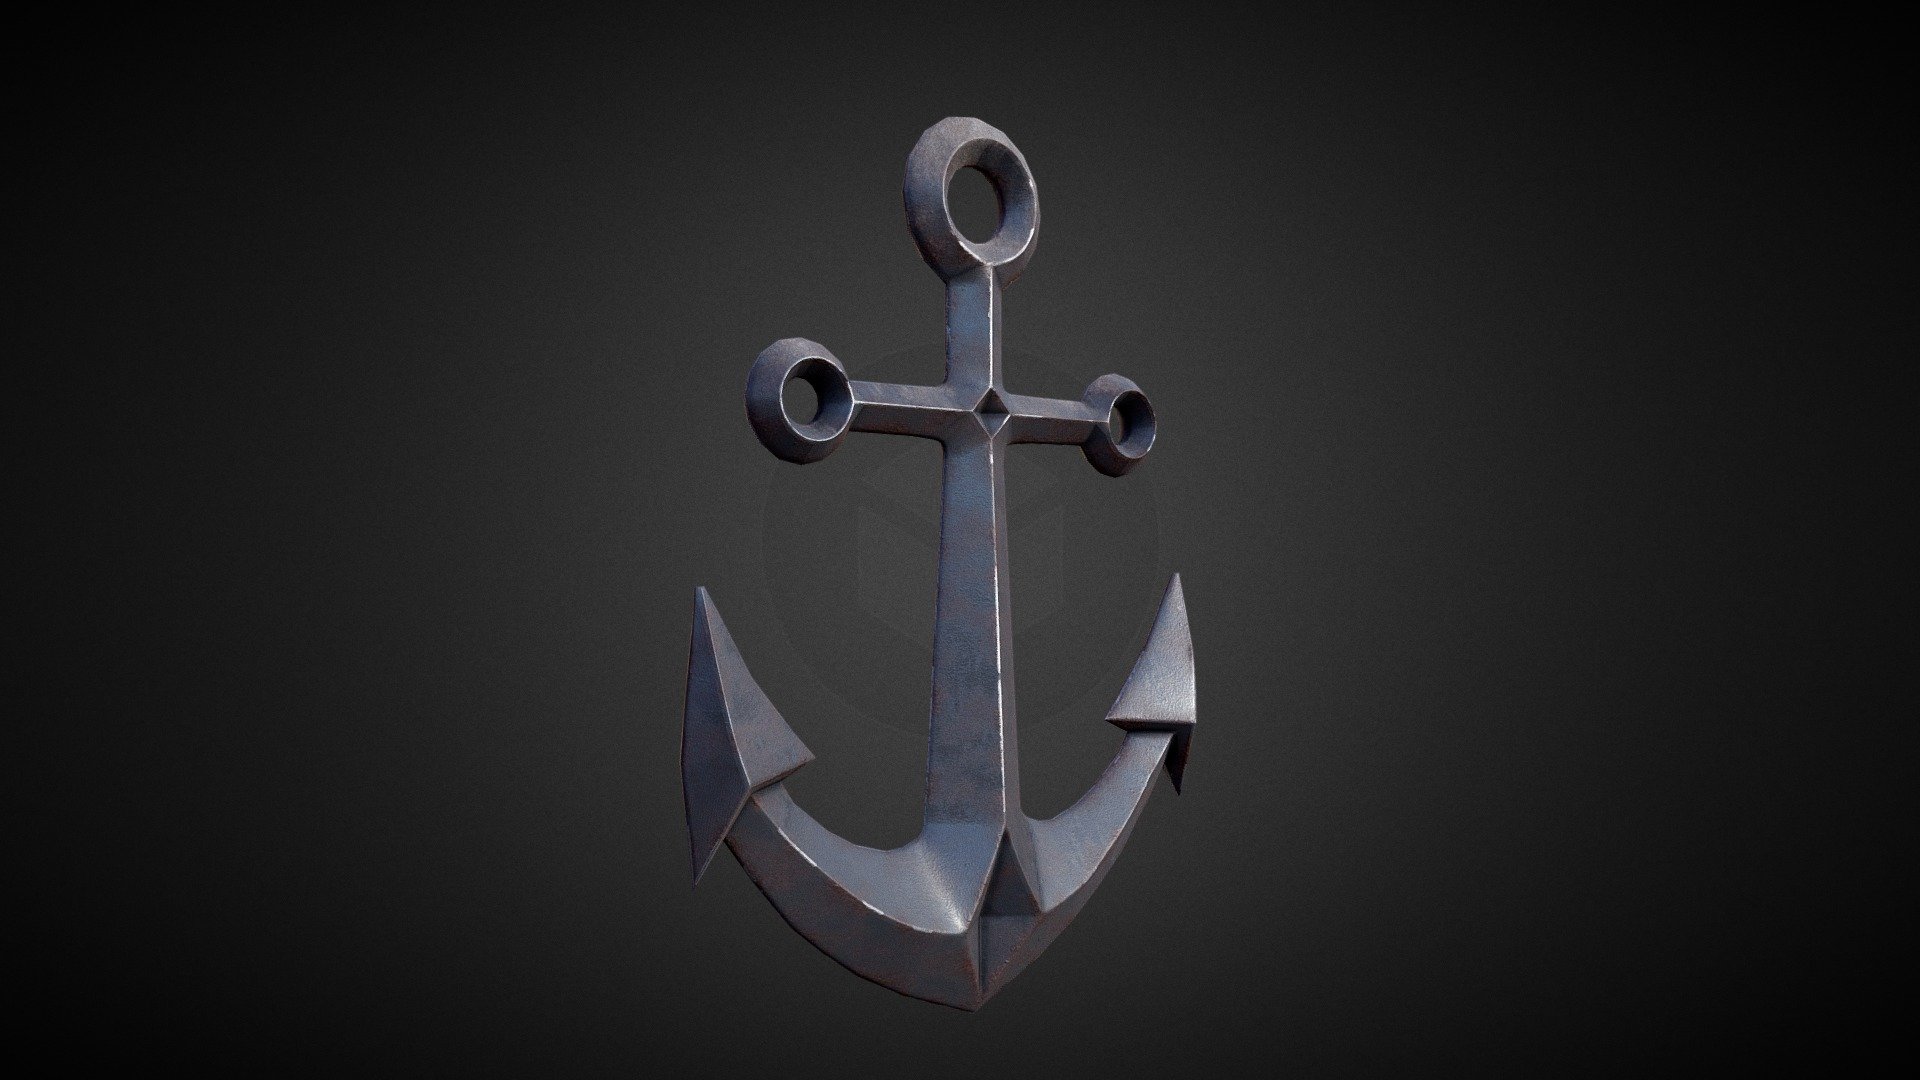 Tutorial here: https://www.youtube.com/channel/UC3R6lDf-Rlb9QW-D3CnhR7w

The model works perfectly in close-ups and high quality renders. It was originally modelled in 3ds Max 22, textured in Substance Painter and rendered with Marmoset Toolbag 3.

What is in the archive: MAX_22; OBJ; FBX ; Textures (2k resolution)

Features: Model resolutions are optimized for polygon efficiency. Model is fully textured with all materials applied. All textures and materials are included and mapped in every format. Autodesk 3ds Max models grouped for easy selection &amp; objects are logically named for ease of scene management. No cleaning up necessary, just drop model into your scene and start rendering. No special plugin needed to open scene.

Textures formats: PNG (2K) - Anchor - Tutorial Included - Buy Royalty Free 3D model by ninashaw 3d model